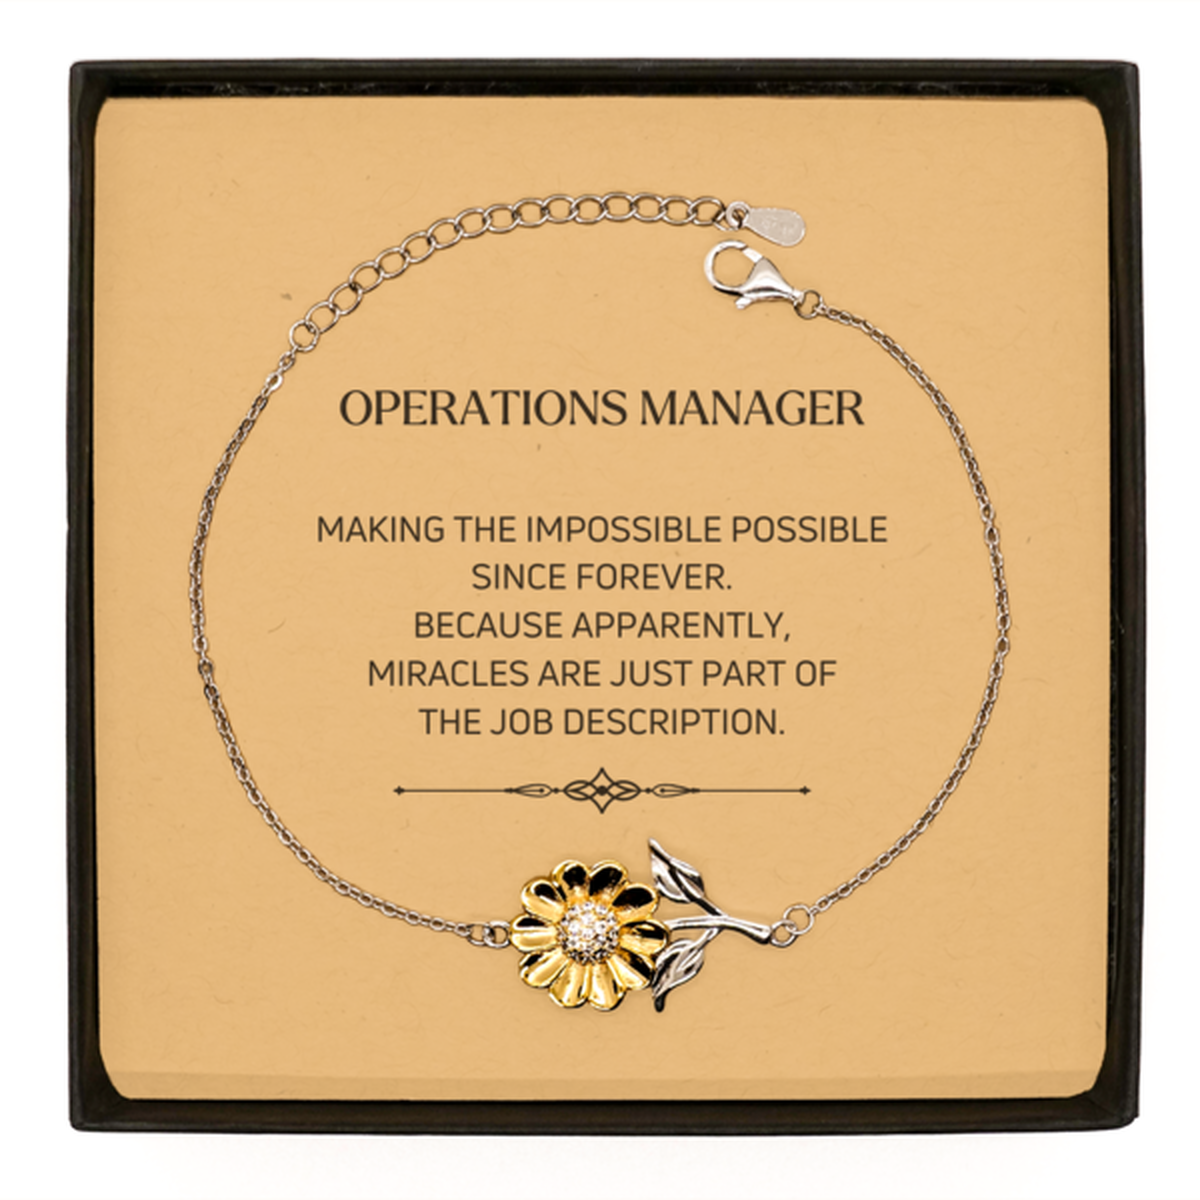 Funny Operations Manager Gifts, Miracles are just part of the job description, Inspirational Birthday Sunflower Bracelet For Operations Manager, Men, Women, Coworkers, Friends, Boss